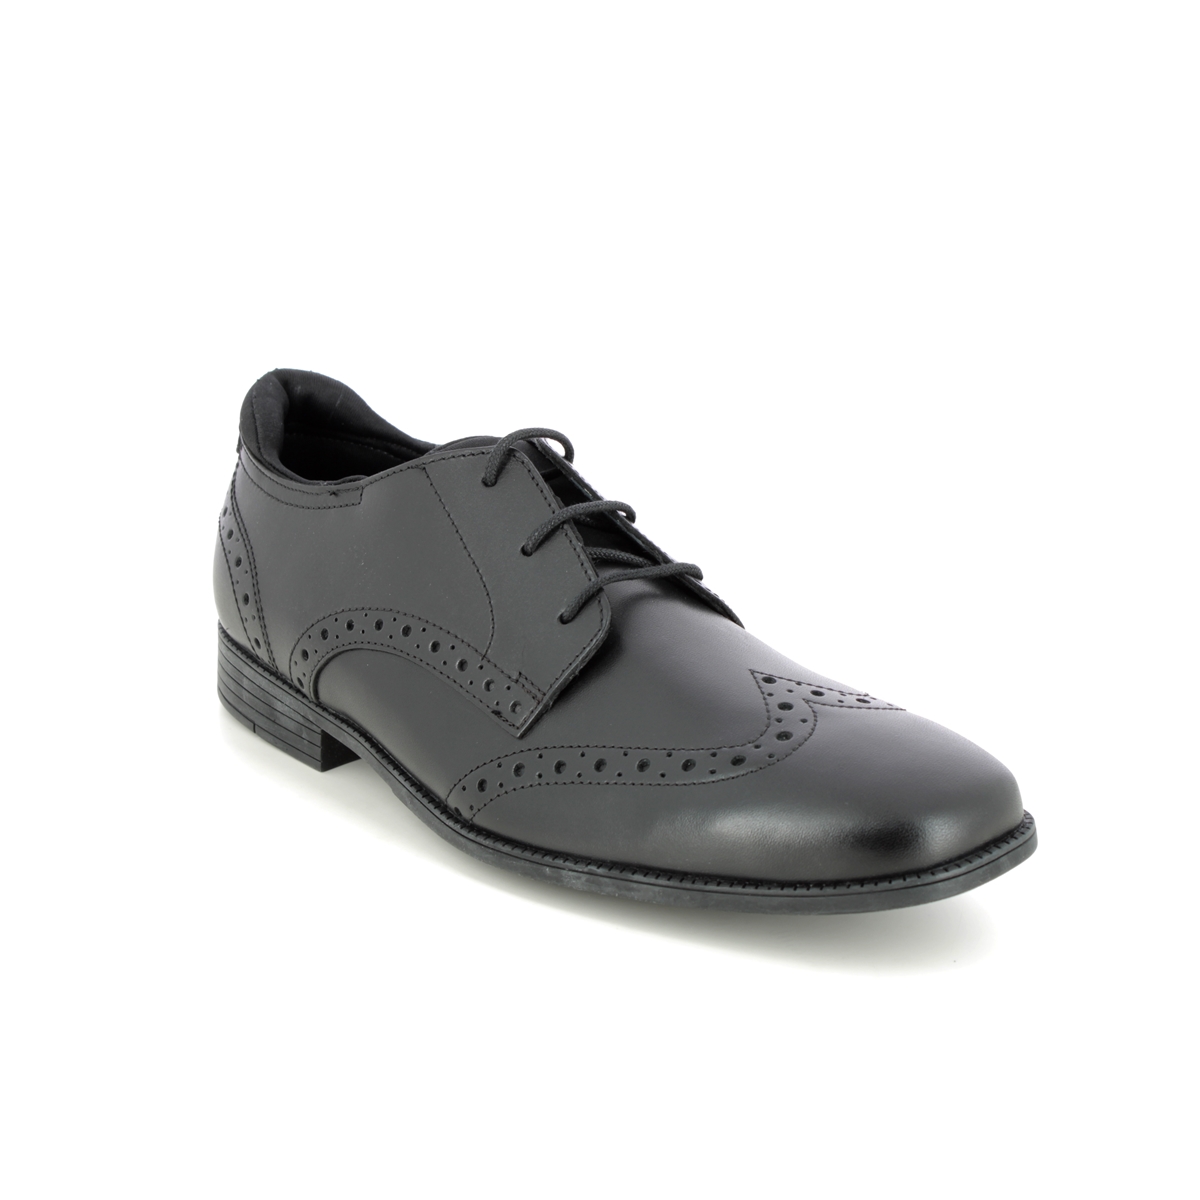 Start Rite - Tailor In Black Leather 2792-76F In Size 5 In Plain Black Leather For School Boys Shoes  In Black Leather For kids